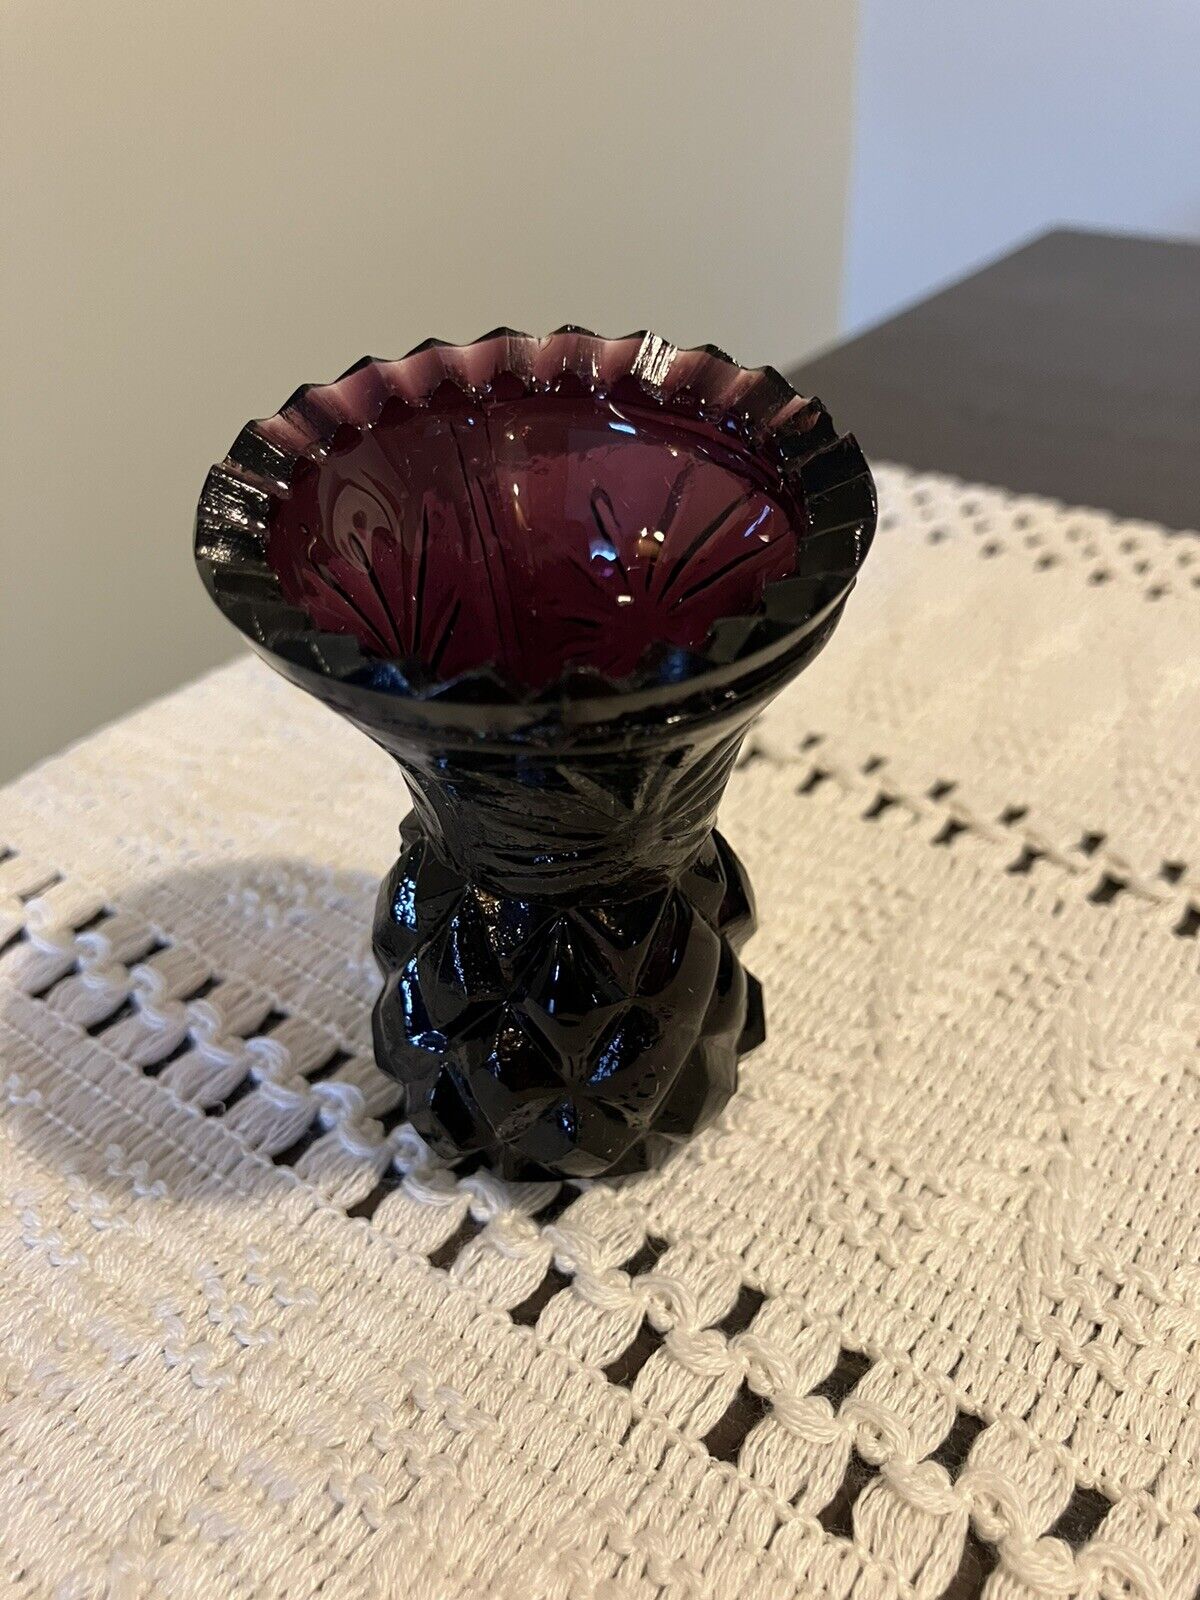 VTG Amethyst Glass Pineapple Toothpick Holder With Sawtooth Edge 3”